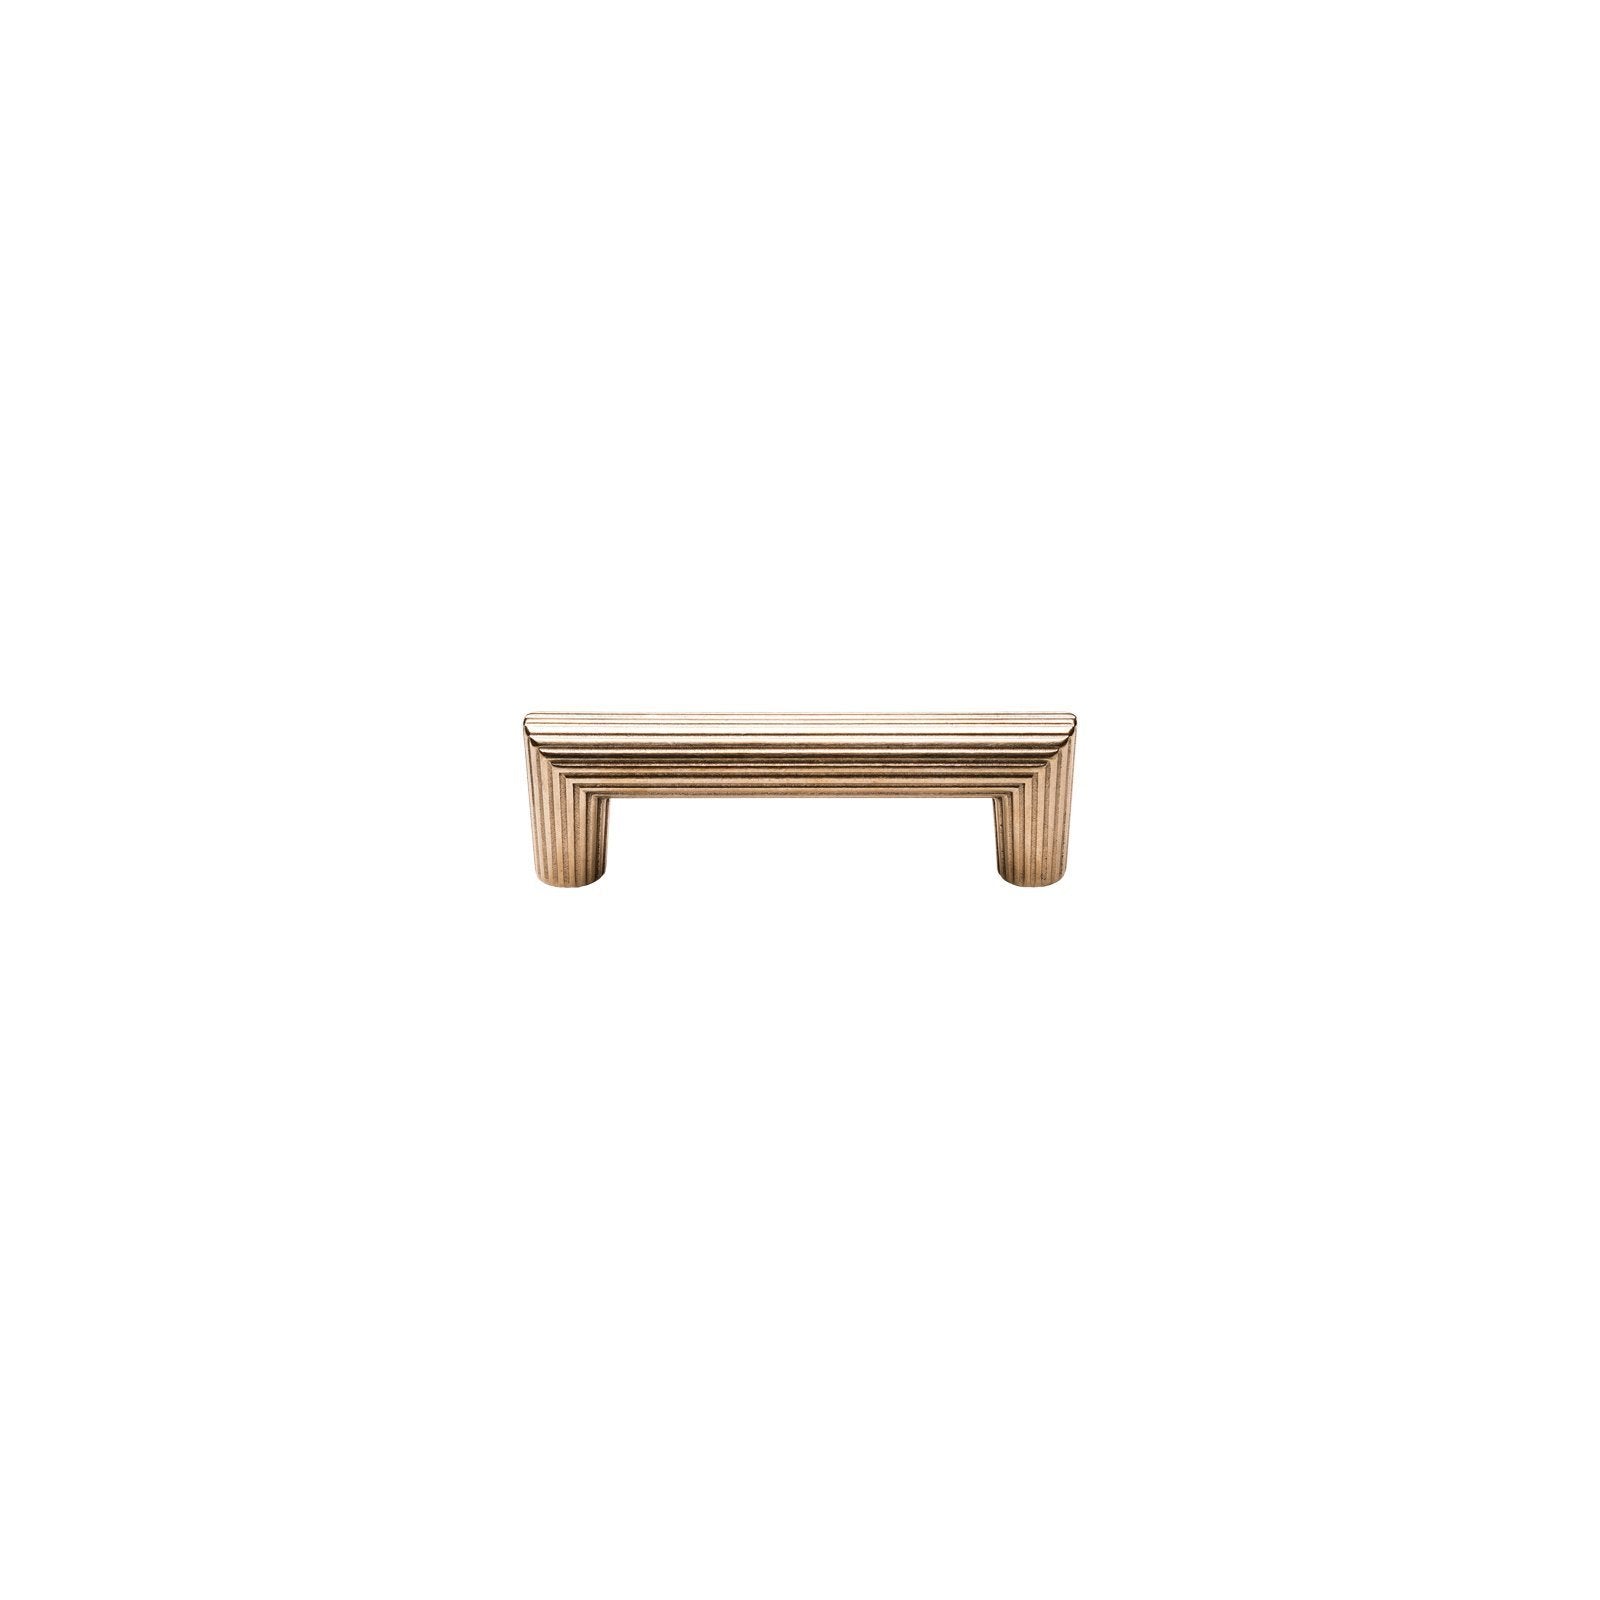 Rocky Mountain Hardware CK10064 - 4" C-to-C Flute Cabinet Pull